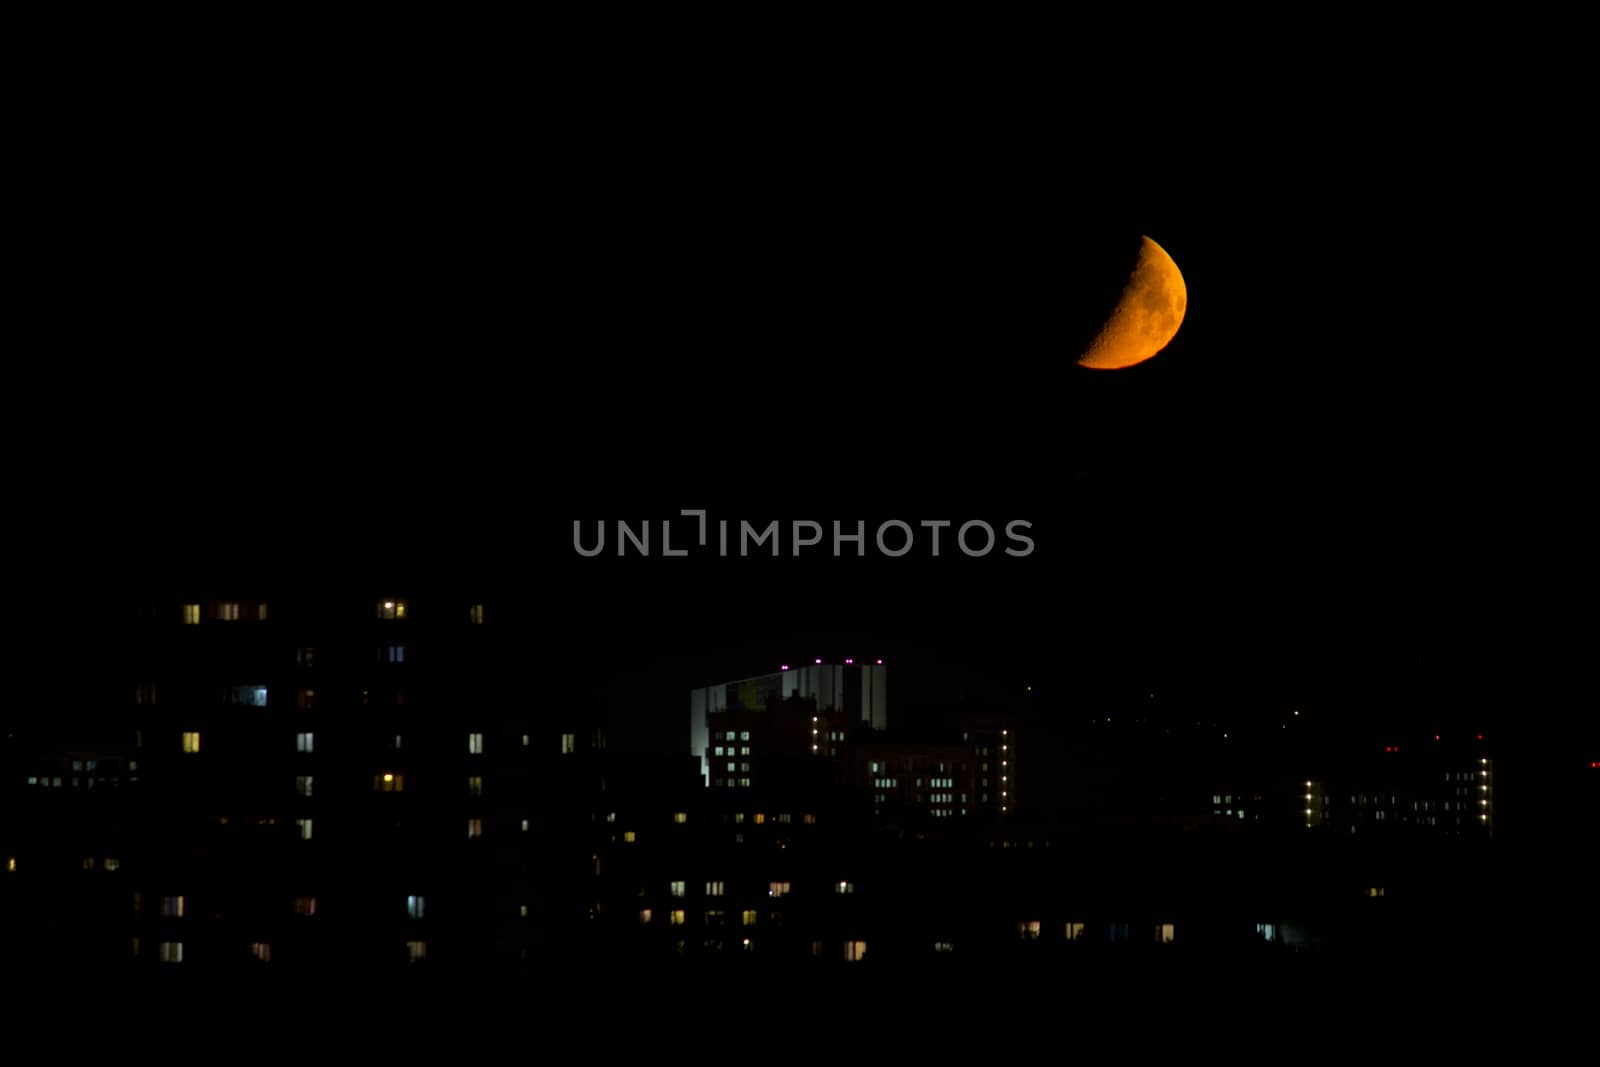 big bloody moon near the horizon in the city